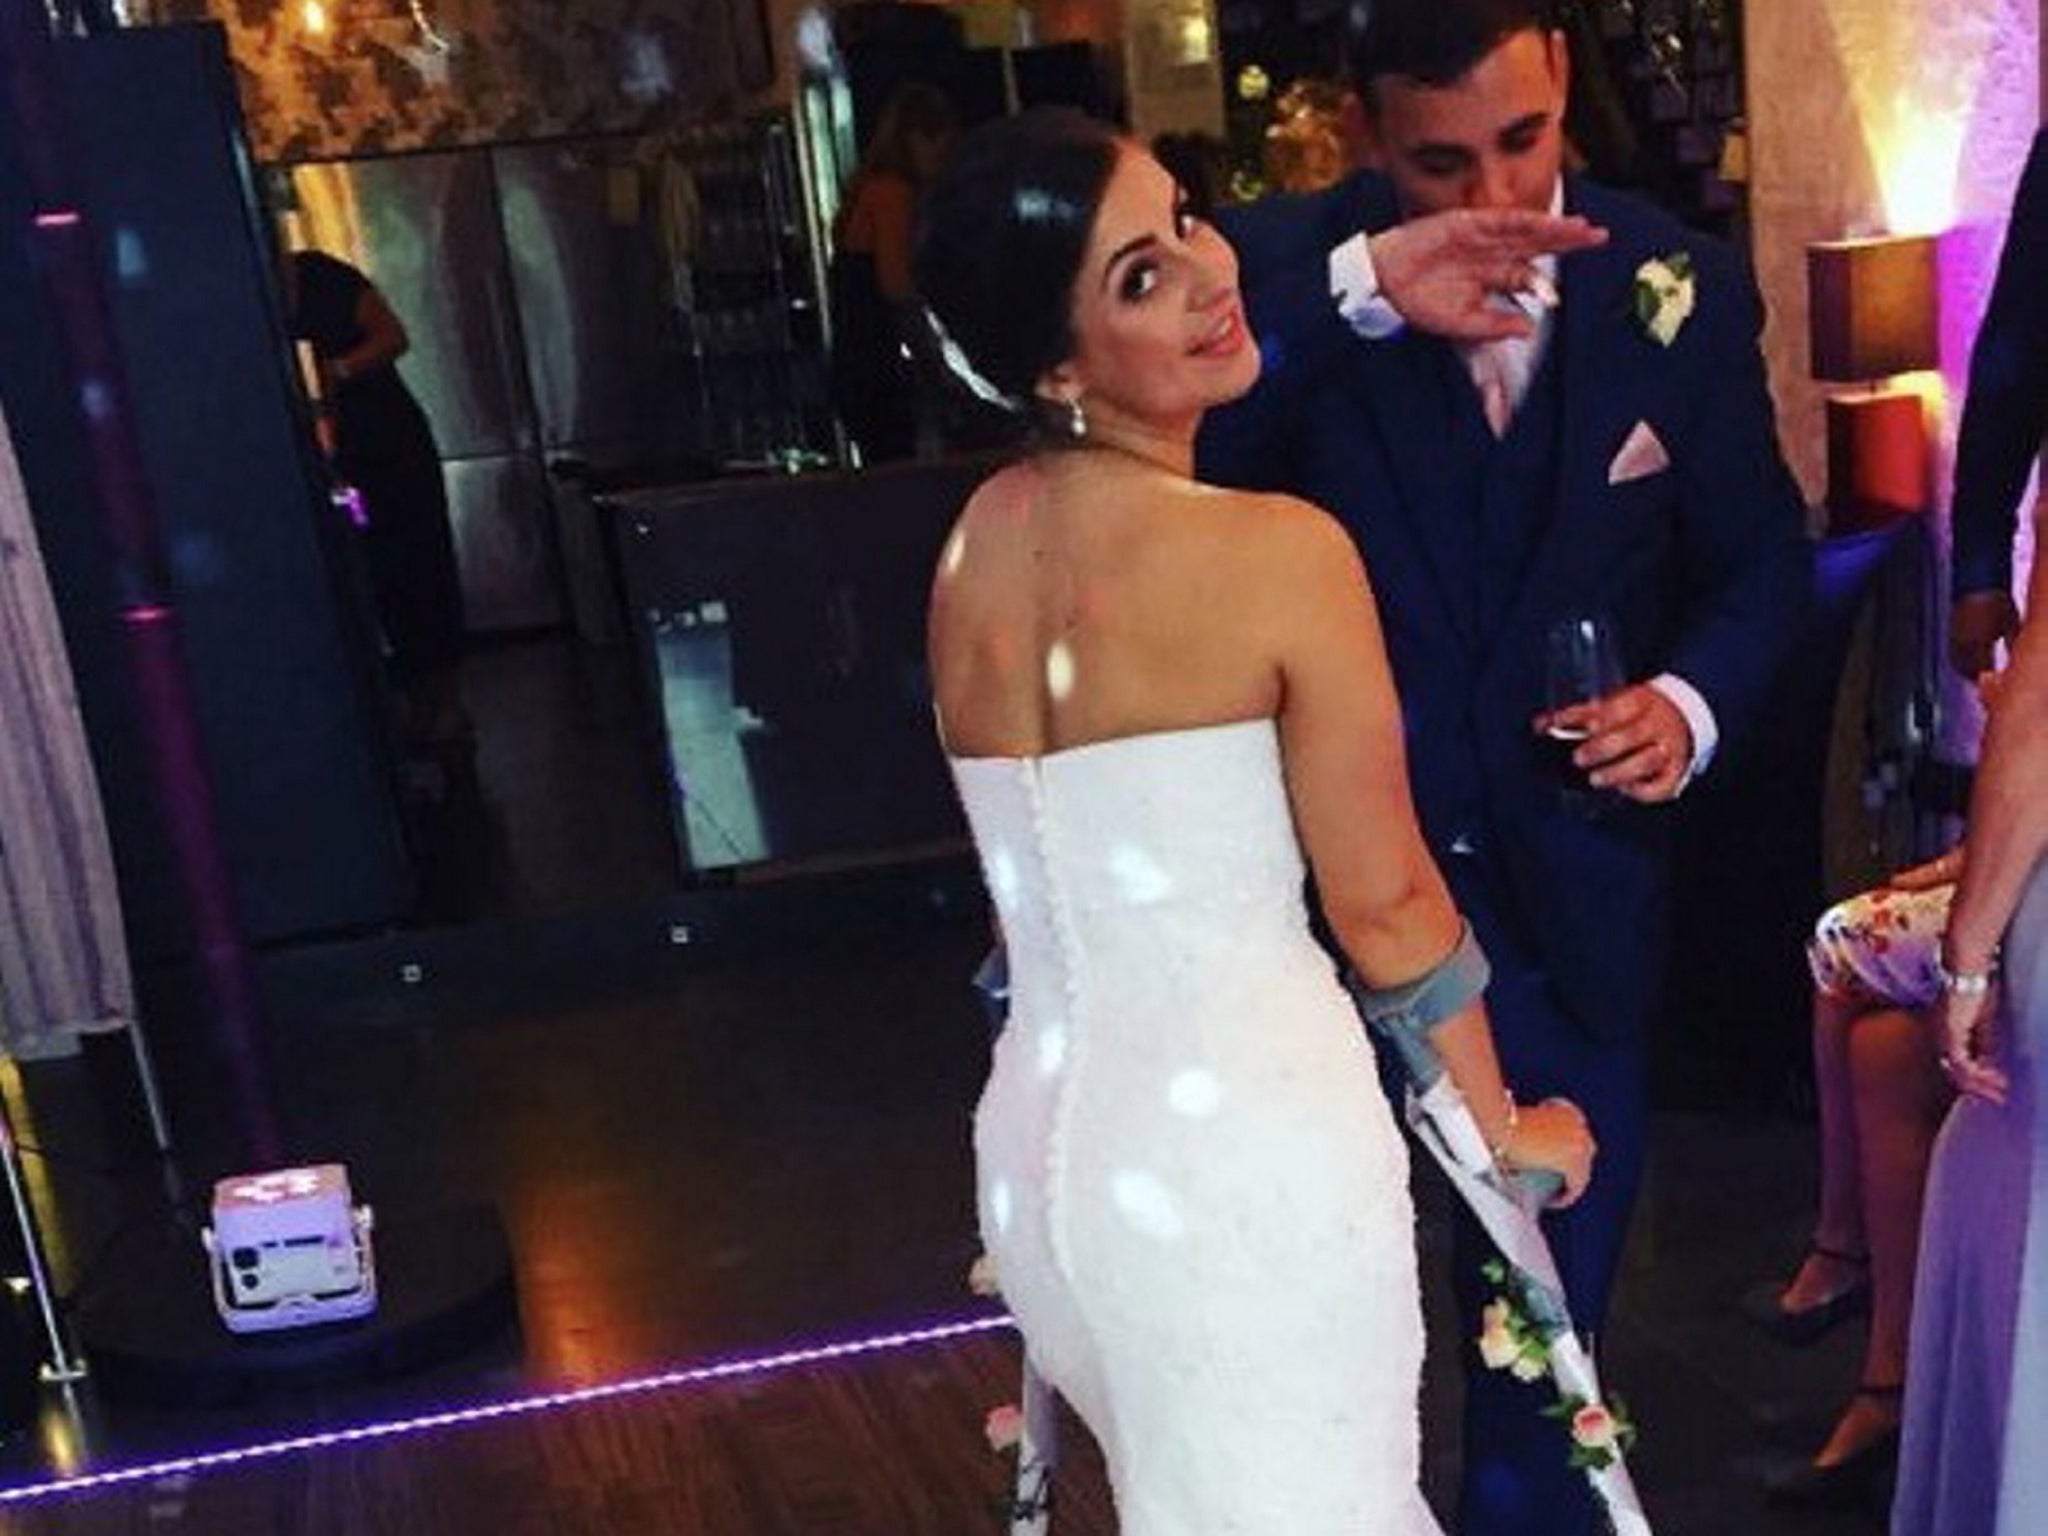 Emily Patel spent her whole wedding day on crutches after the car broke her leg in three places